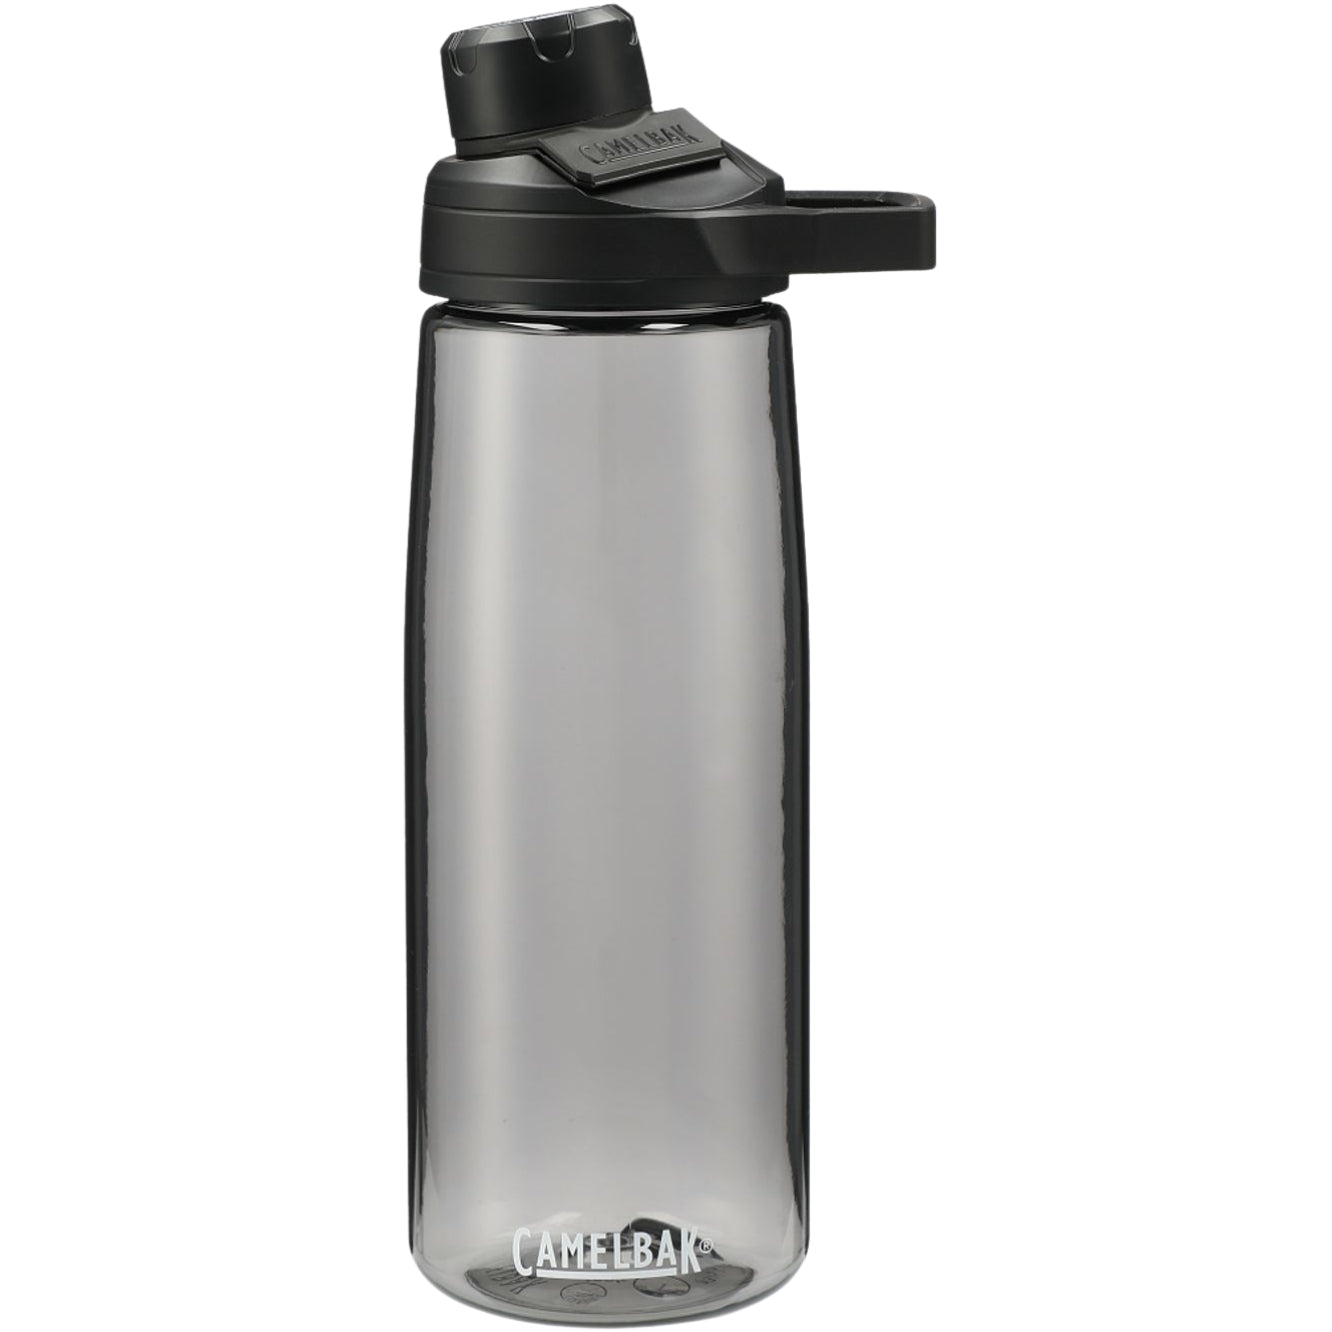 Customizable recycled plastic Camelbak Chute water bottle in gray